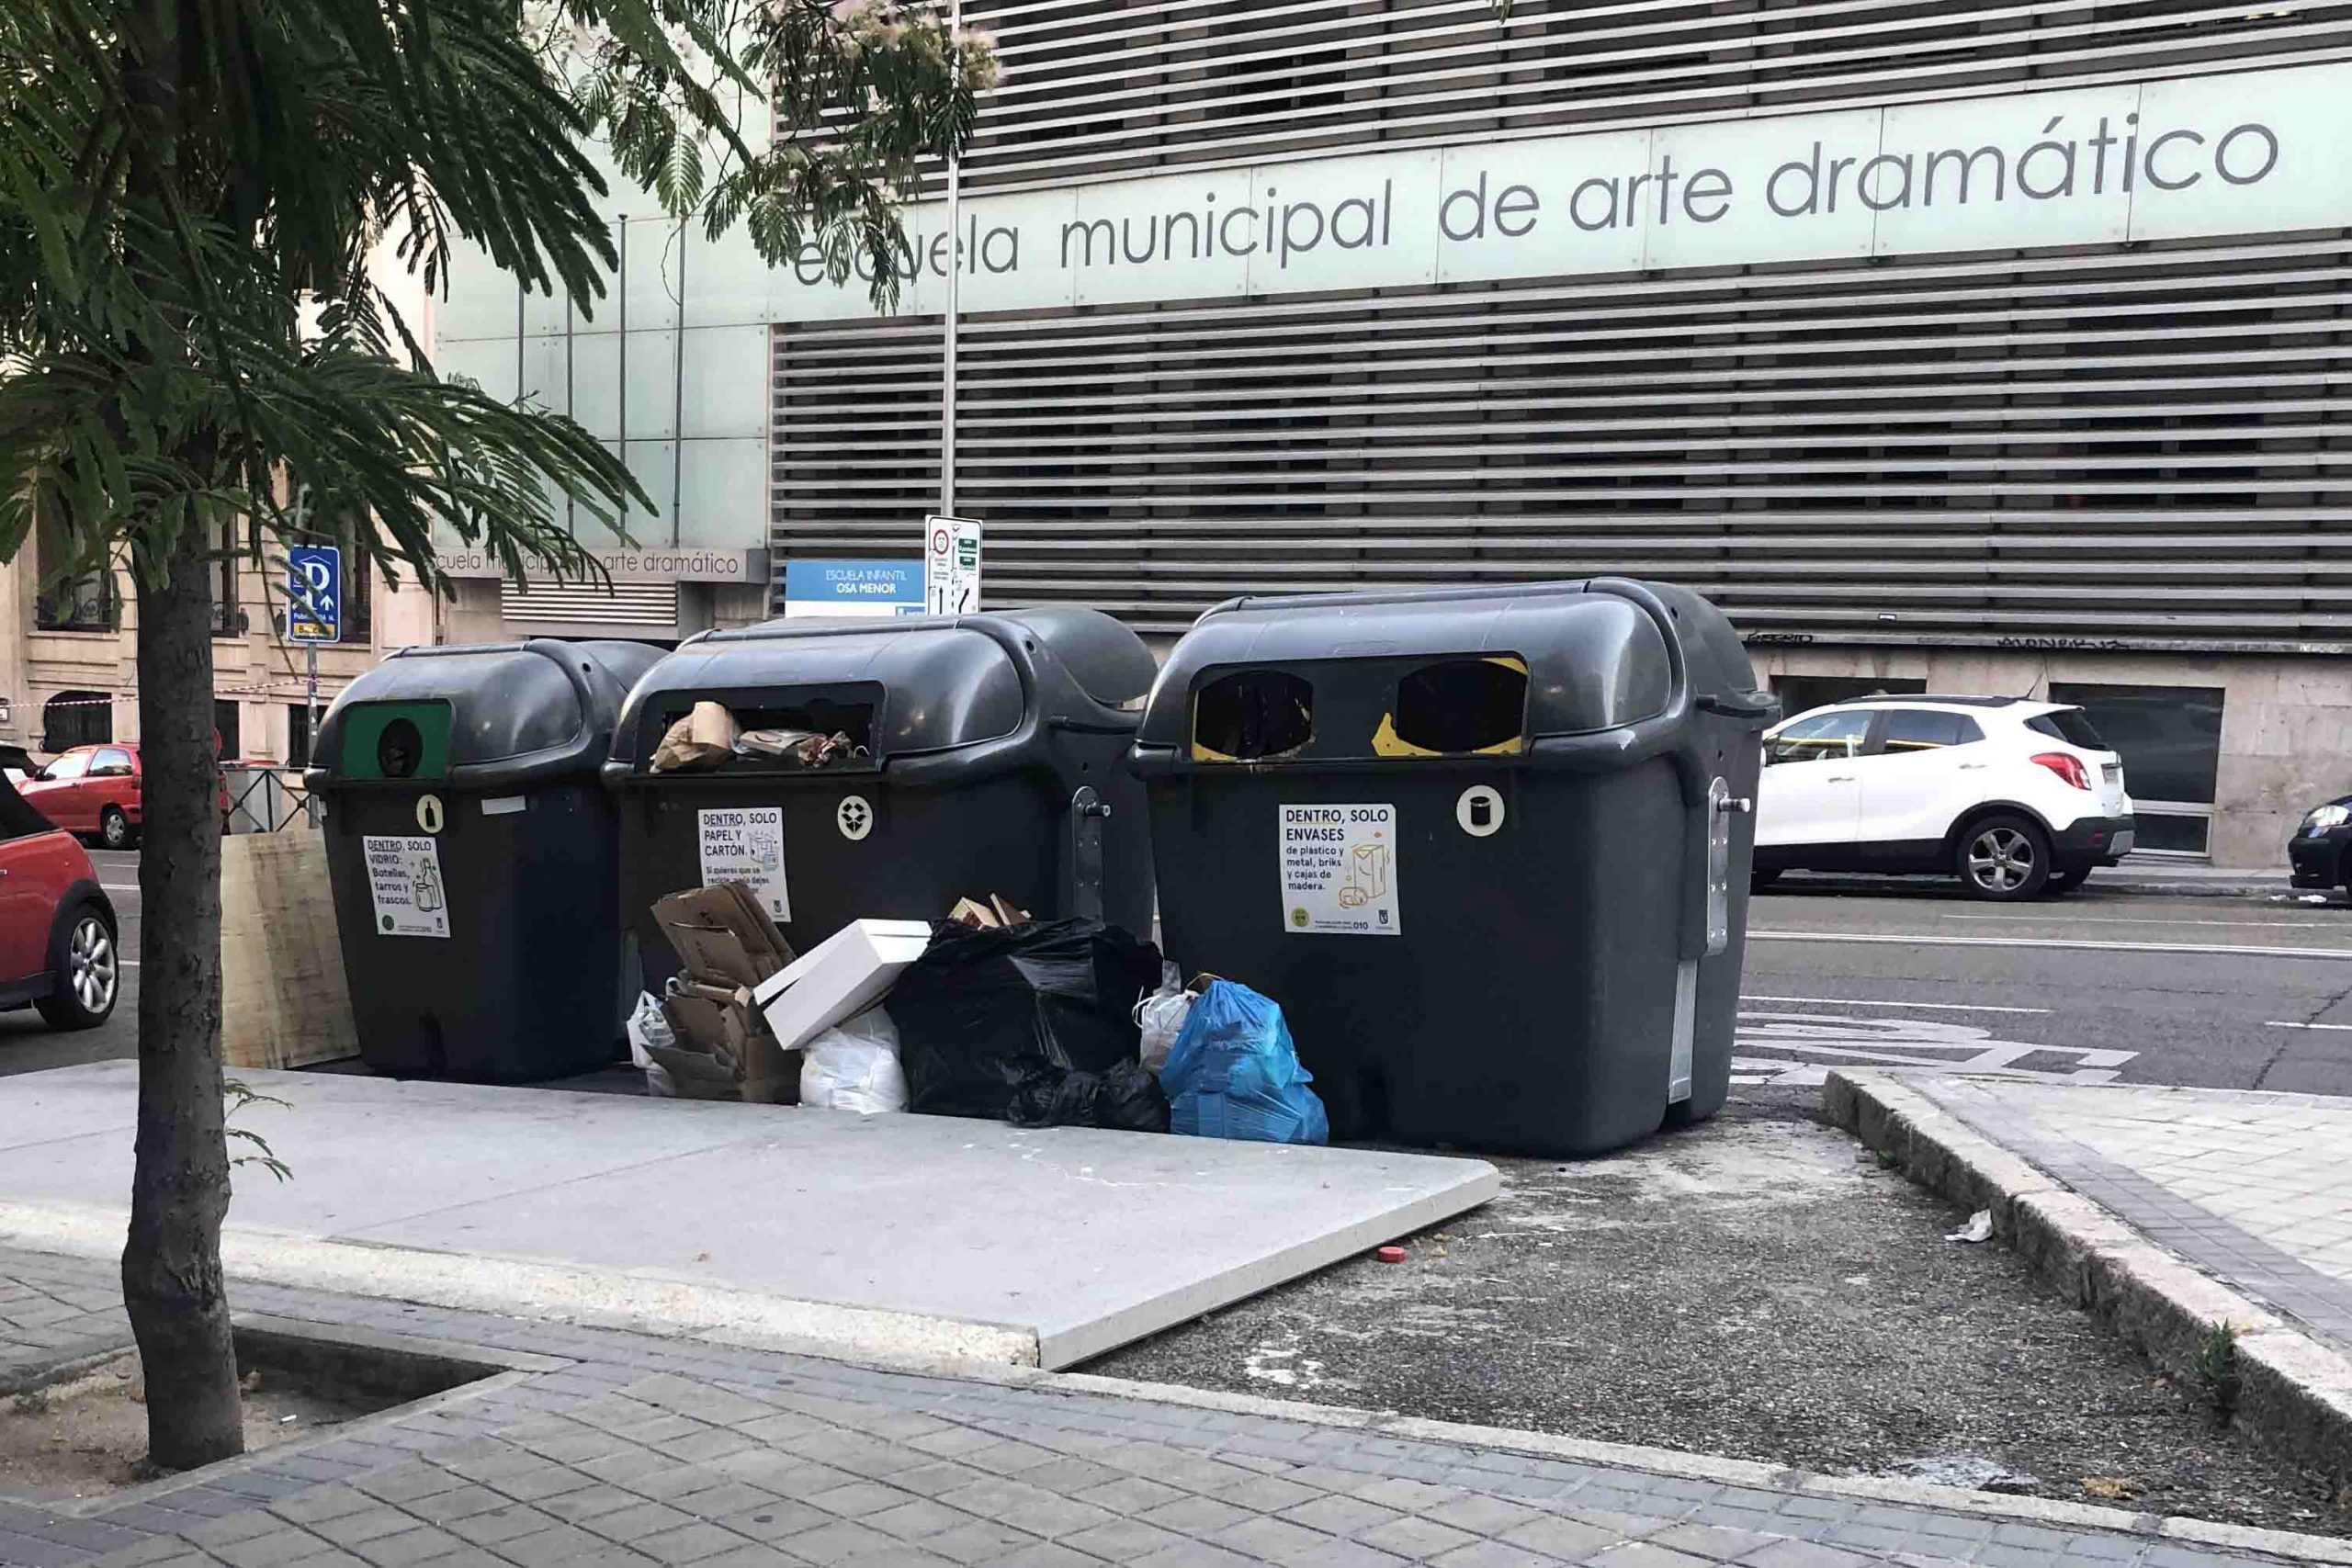 Madrid found solution for overflowing bins